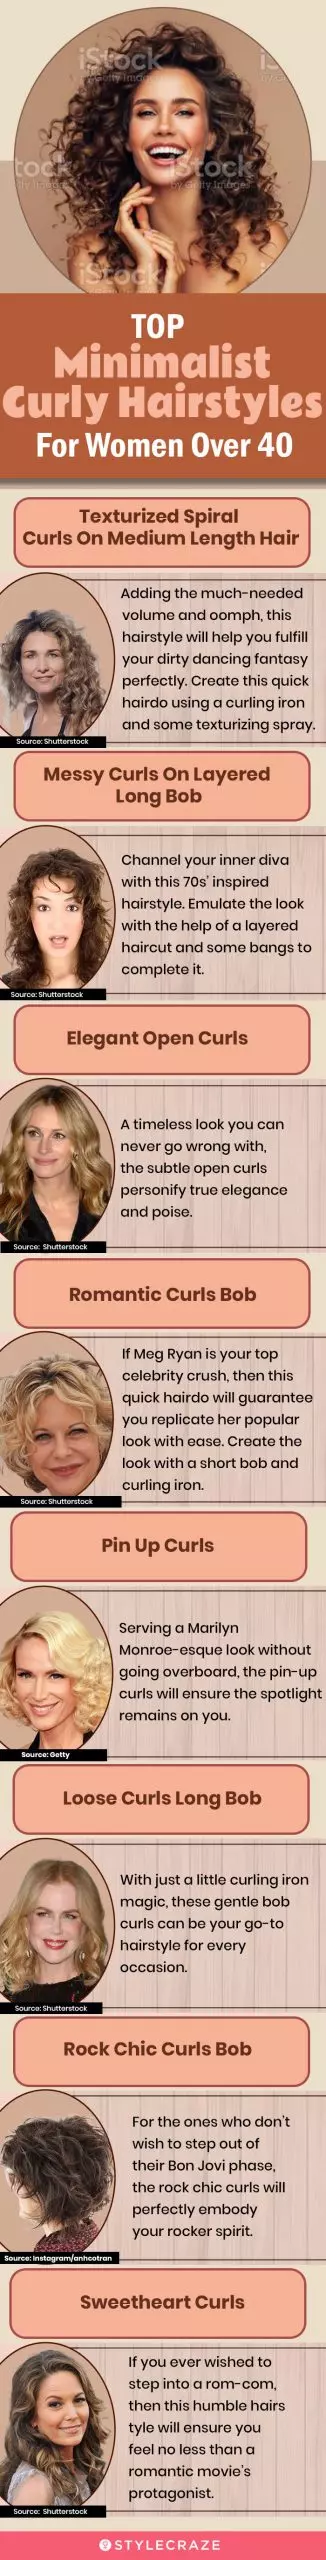 Top Minimalist Curly Hairstyles For Women Over 40 (infographic)